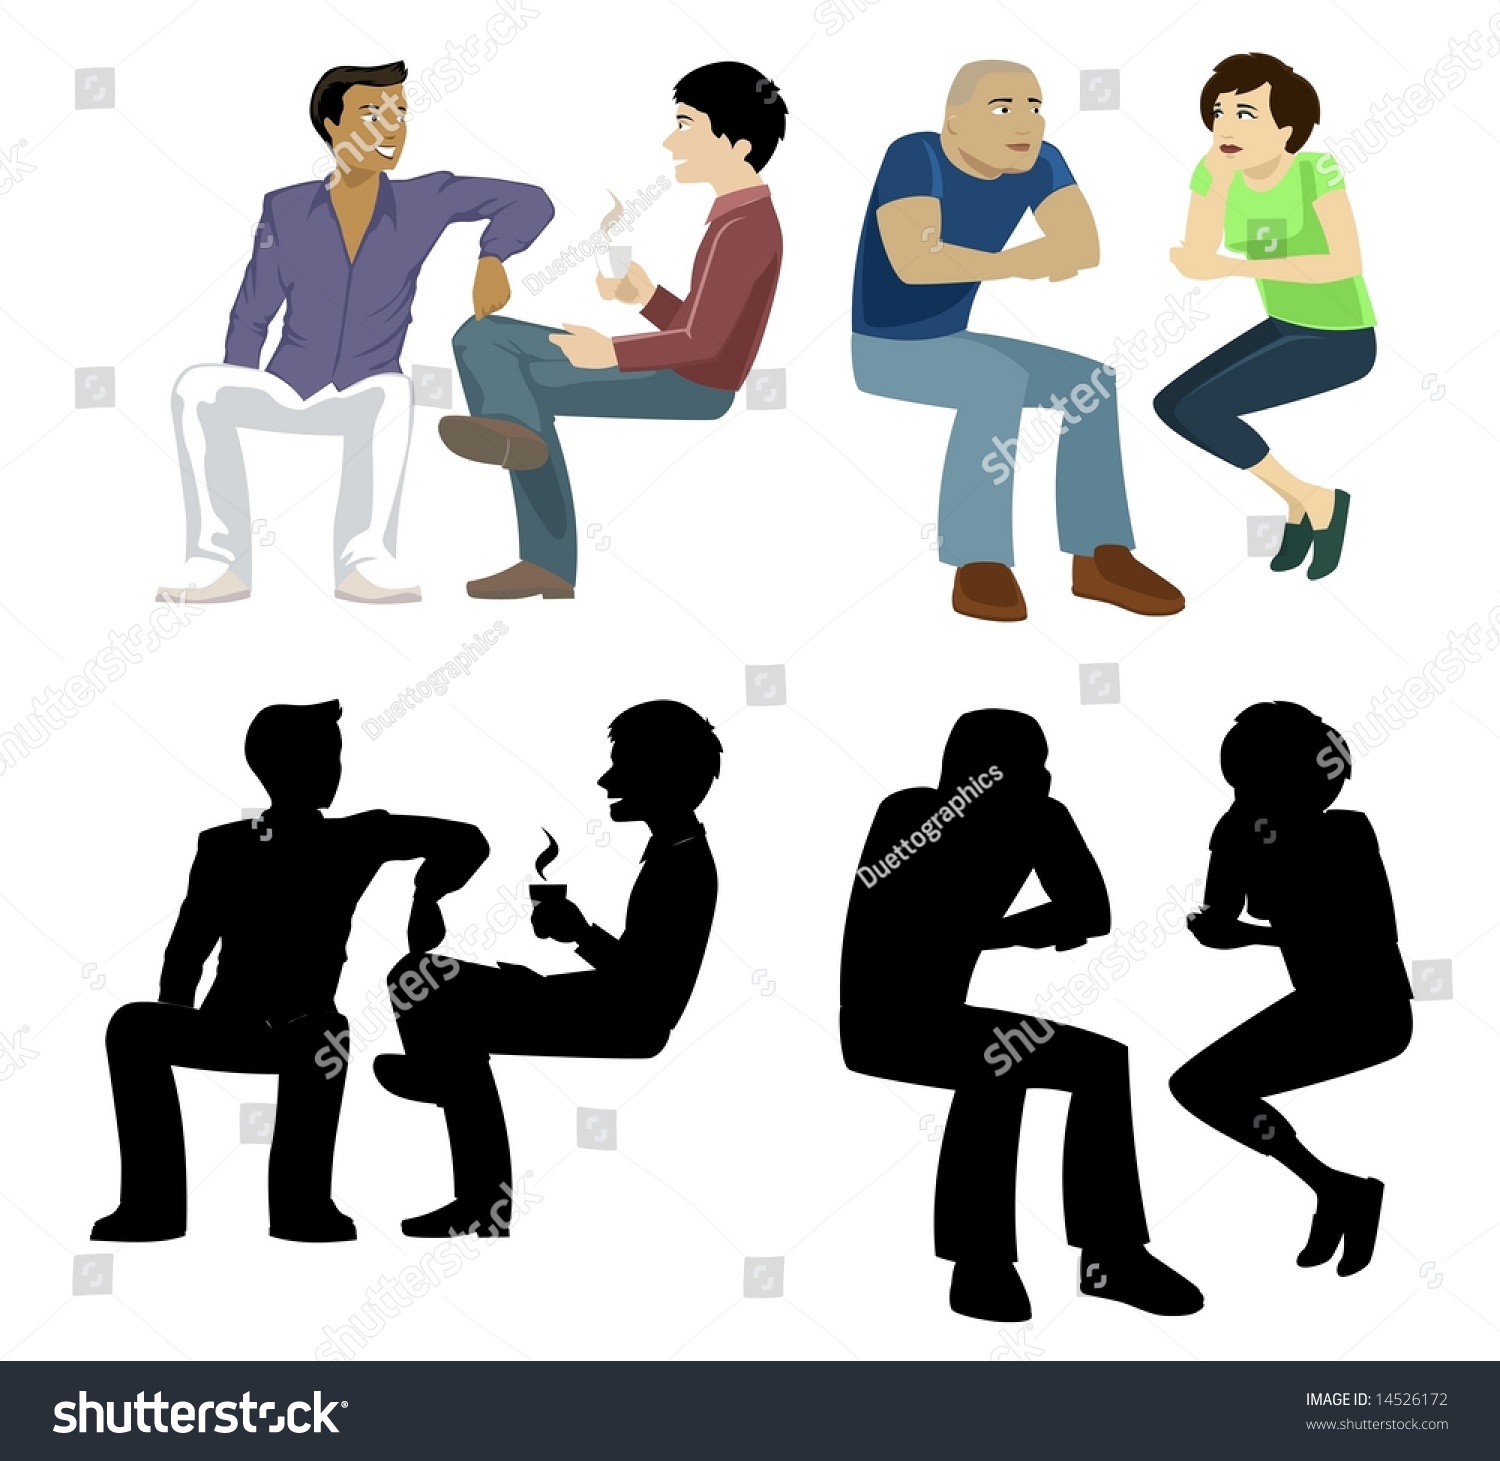 Sitting People Collection 1- Vector - 14526172 : Shutterstock